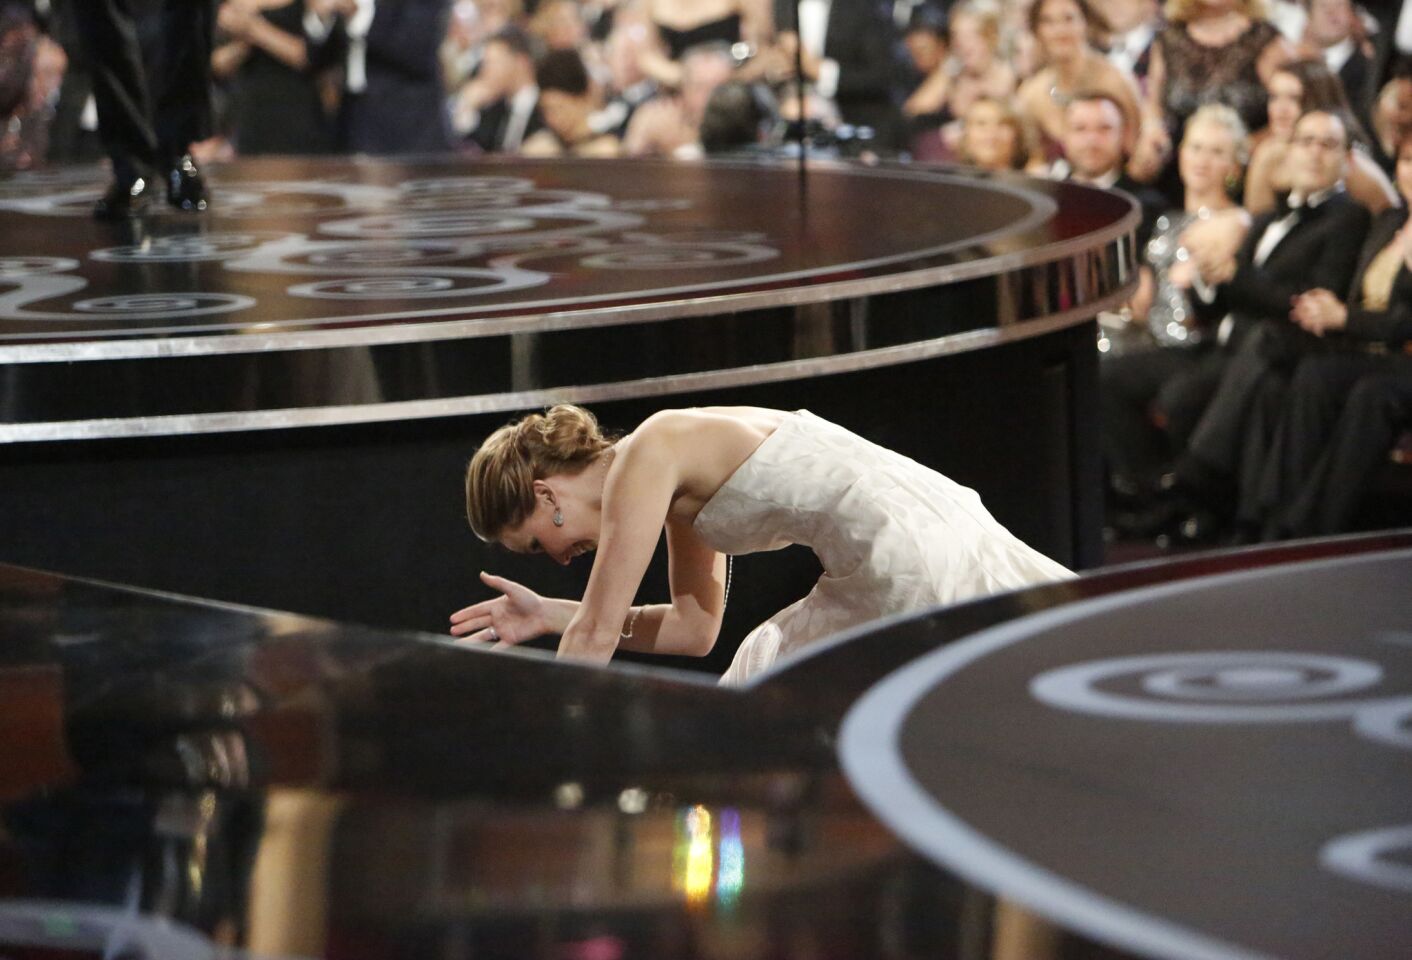 Could we crown Jennifer Lawrence the queen of adorable award fumbles? There was her tumble to accept the award for best actress at the 2013 Oscars, pictured. And then there was the more unfortunate ripping of her dress at the 2013 SAG Awards. Or was it a rip? While viewers adamantly believed it was, Lawrence actually just pulled up the top part of her dress to reveal the sheer lining in between that and the skirt.